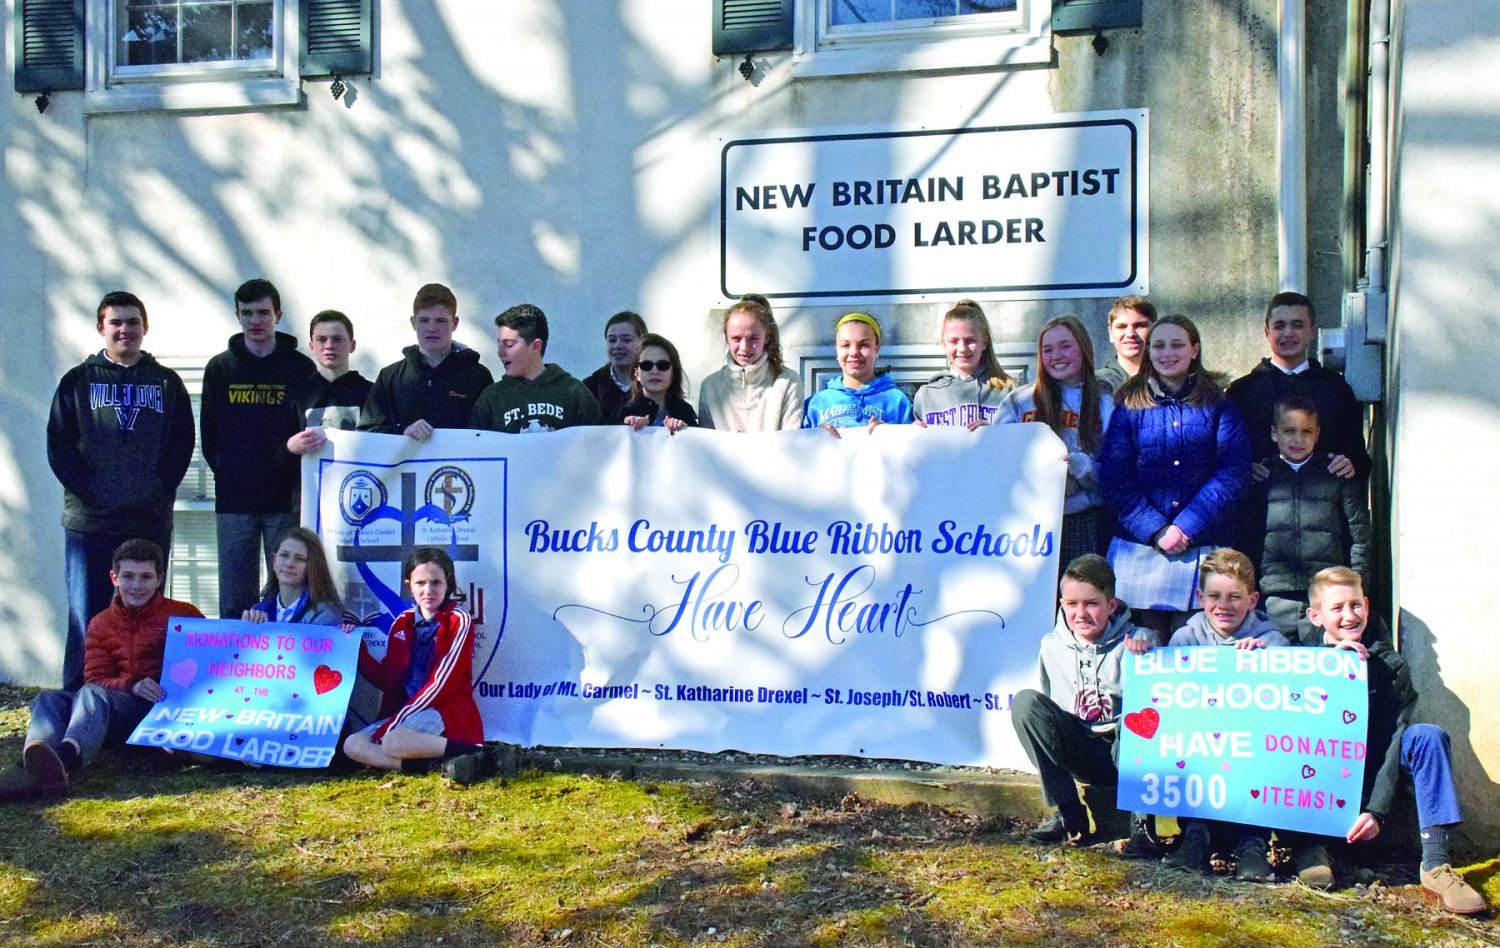 Students from four Blue Ribbon schools – Our Lady of Mount Carmel School in Doylestown, St. Katharine Drexel in Holland, St. Joseph/St. Roberts in Warrington, and St. Jude in Chalfont – participate in a food drive for the New Britian Food Larder. Photograph by Debby High.